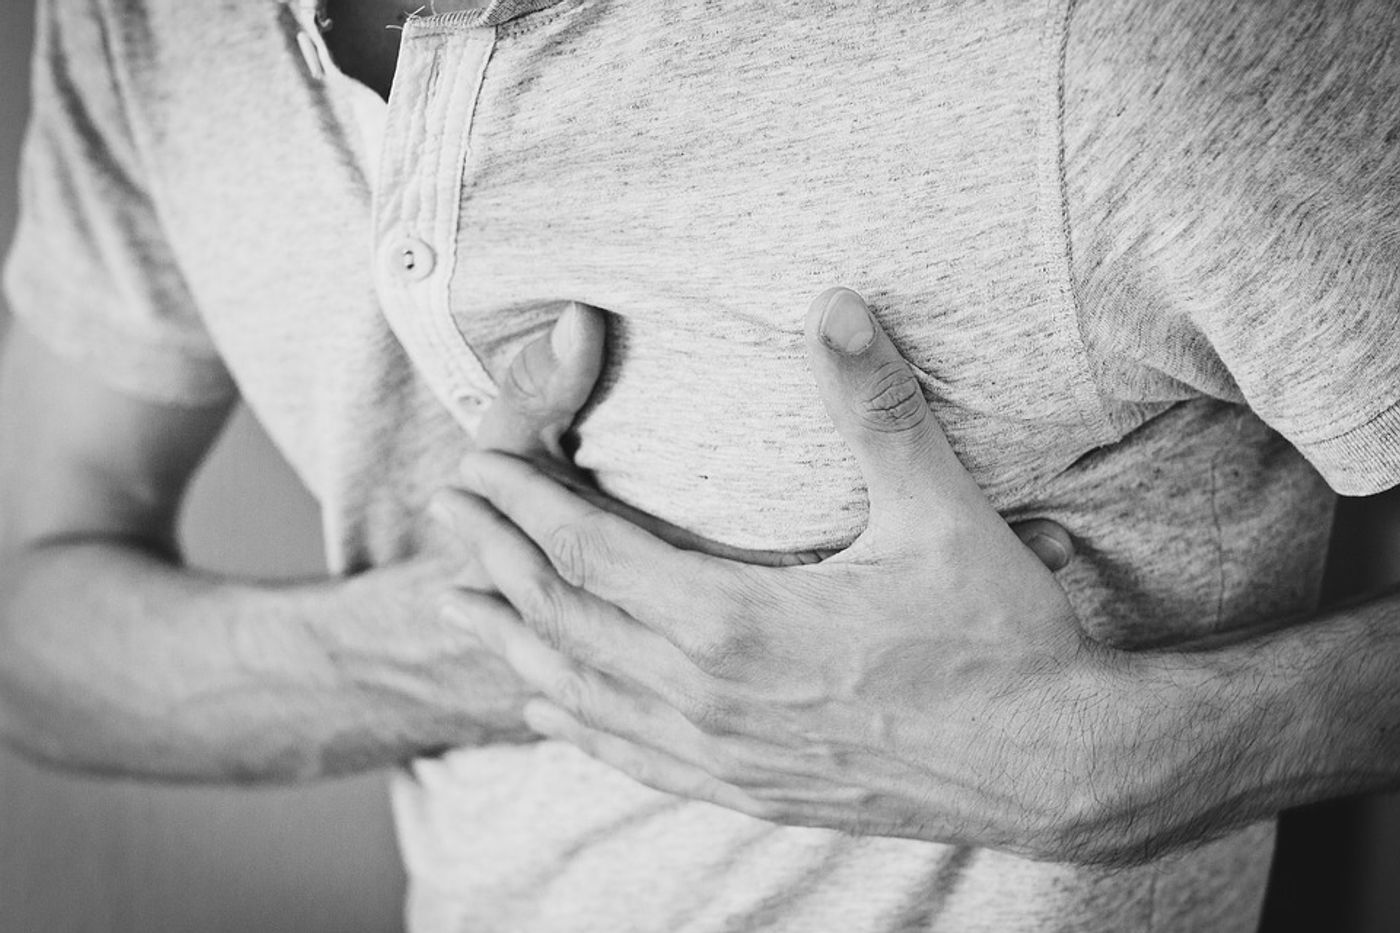 According to the American Heart Association, cardiovascular disease is the underlying cause of death for nearly 1 in every 3 deaths in the United States.